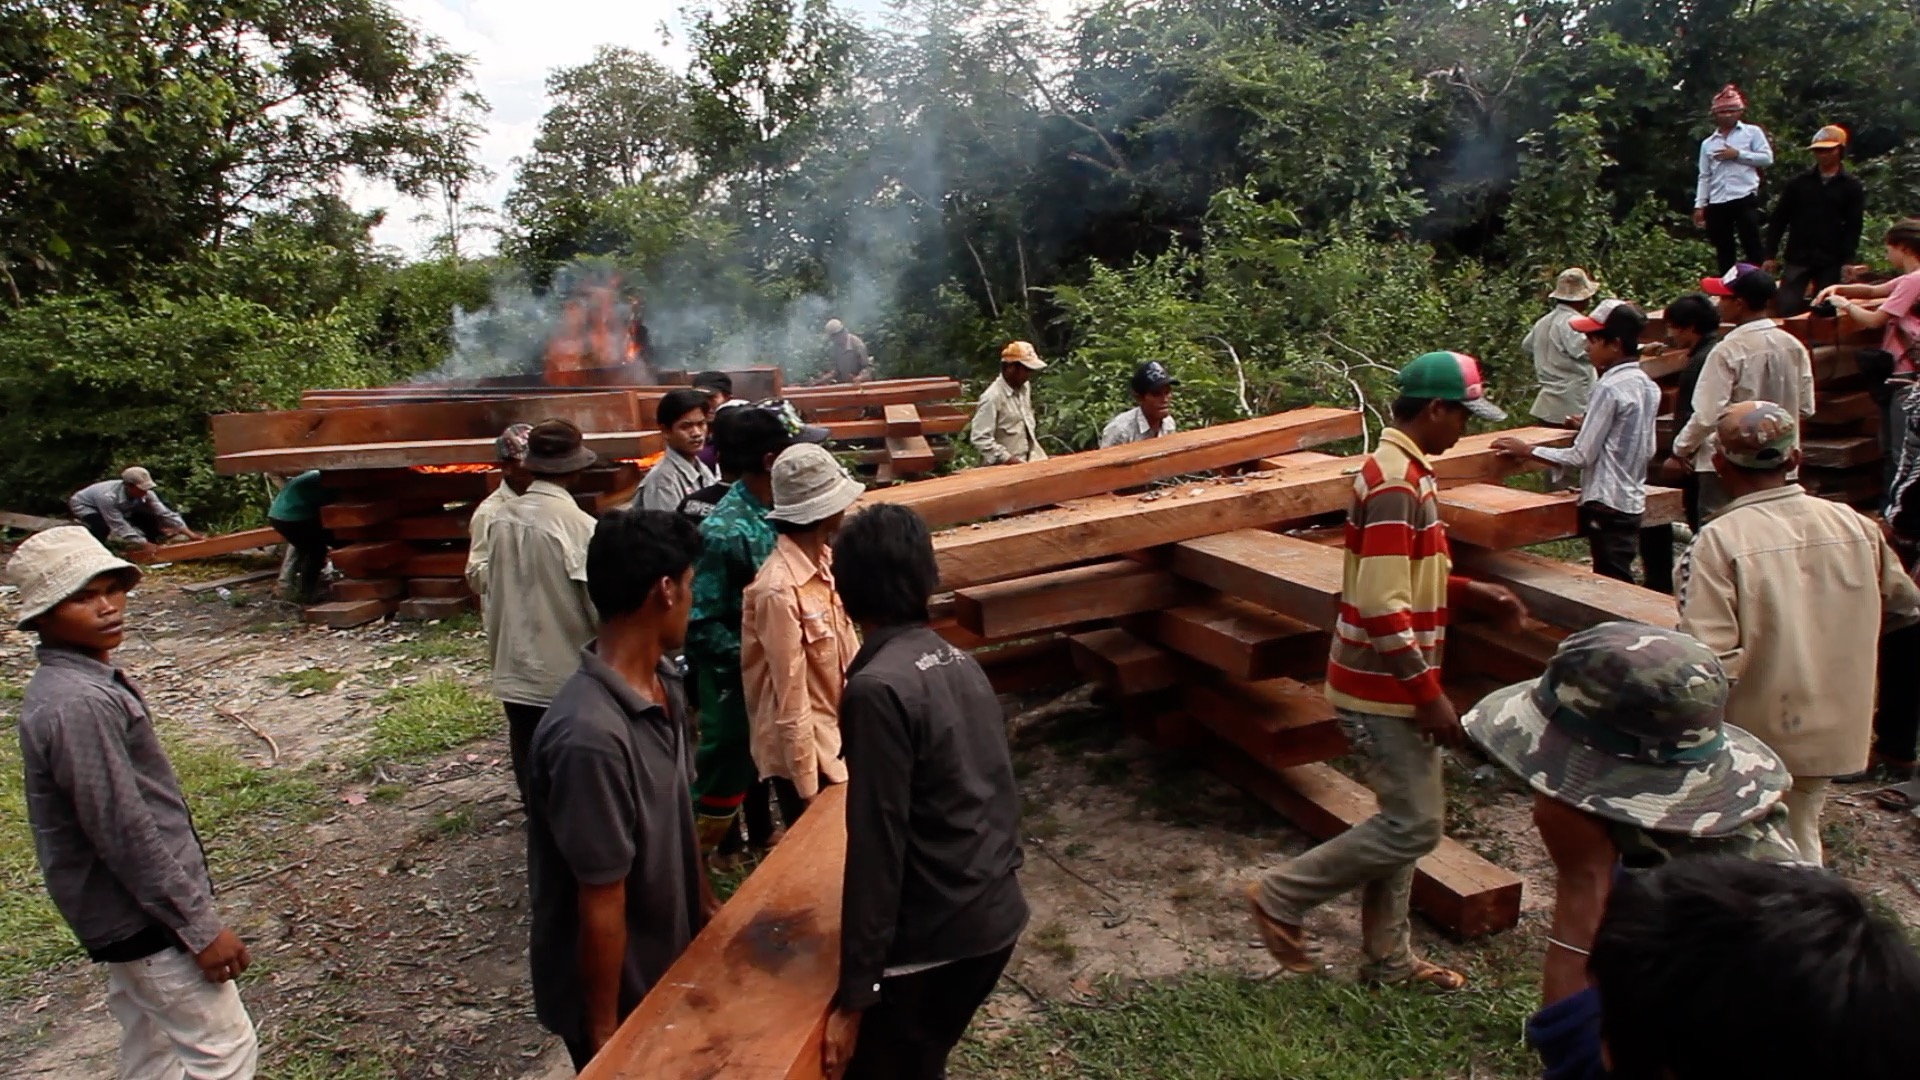 In 2011, members of the Prey Lang Community Network, a grassroots activism group intent of preserving the protected area, burn an unmarked stockpile of illegal timber shortly before local authorities attempt to arrest the late forest activist Chut Wutty. Image supplied. 